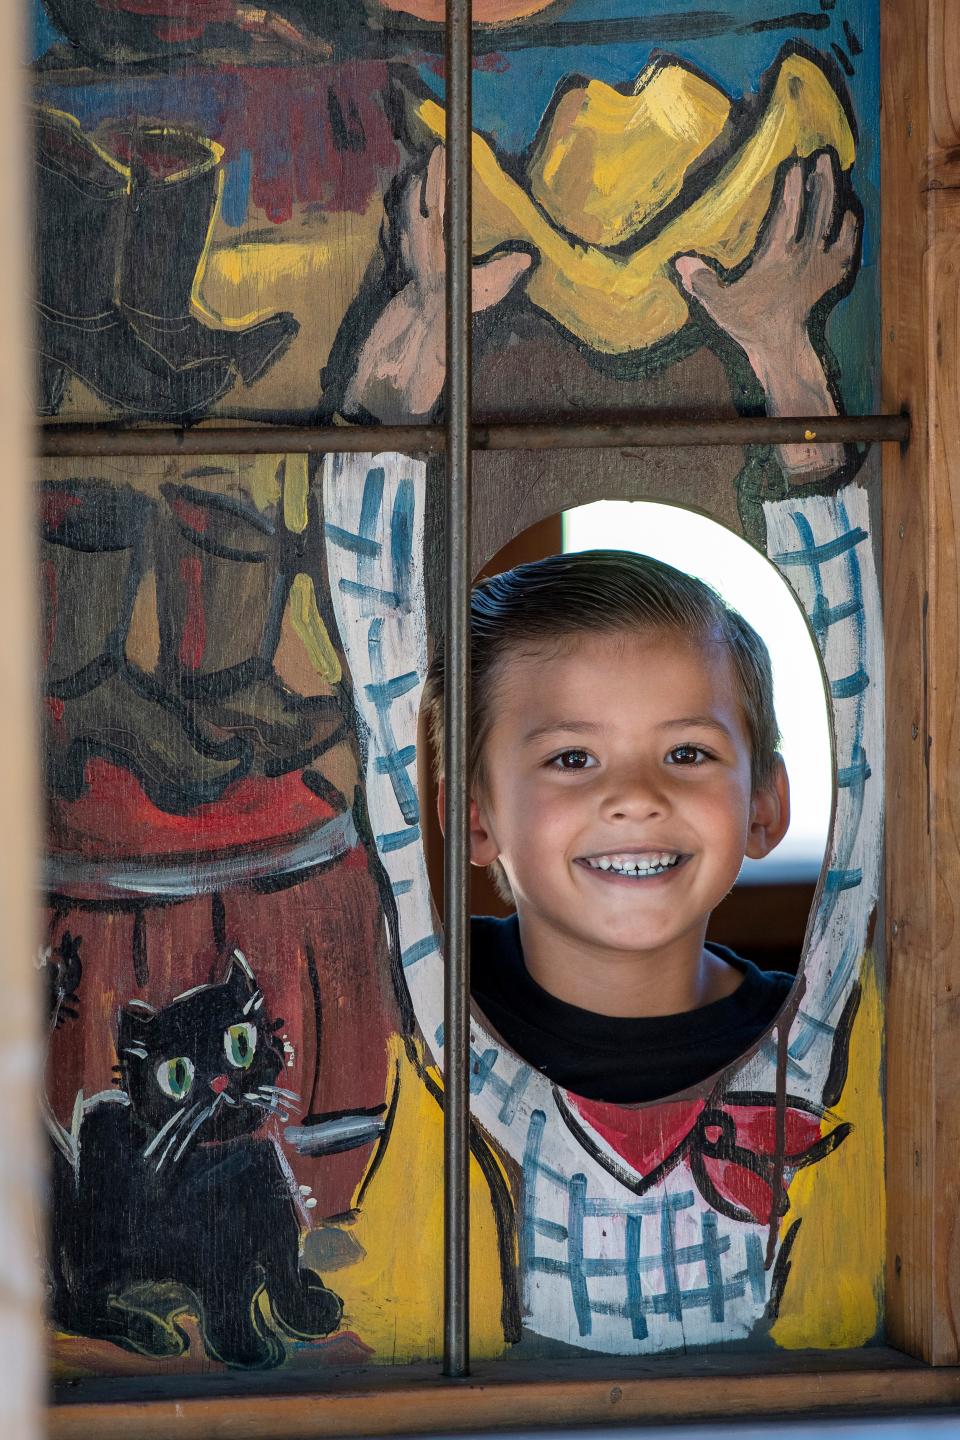 Jaxxon Tjaden, 5, of Stockton peeks out from one of the cutouts at the Pixie Woods Jail during the Christmas in July at Pixie Woods on July 23.